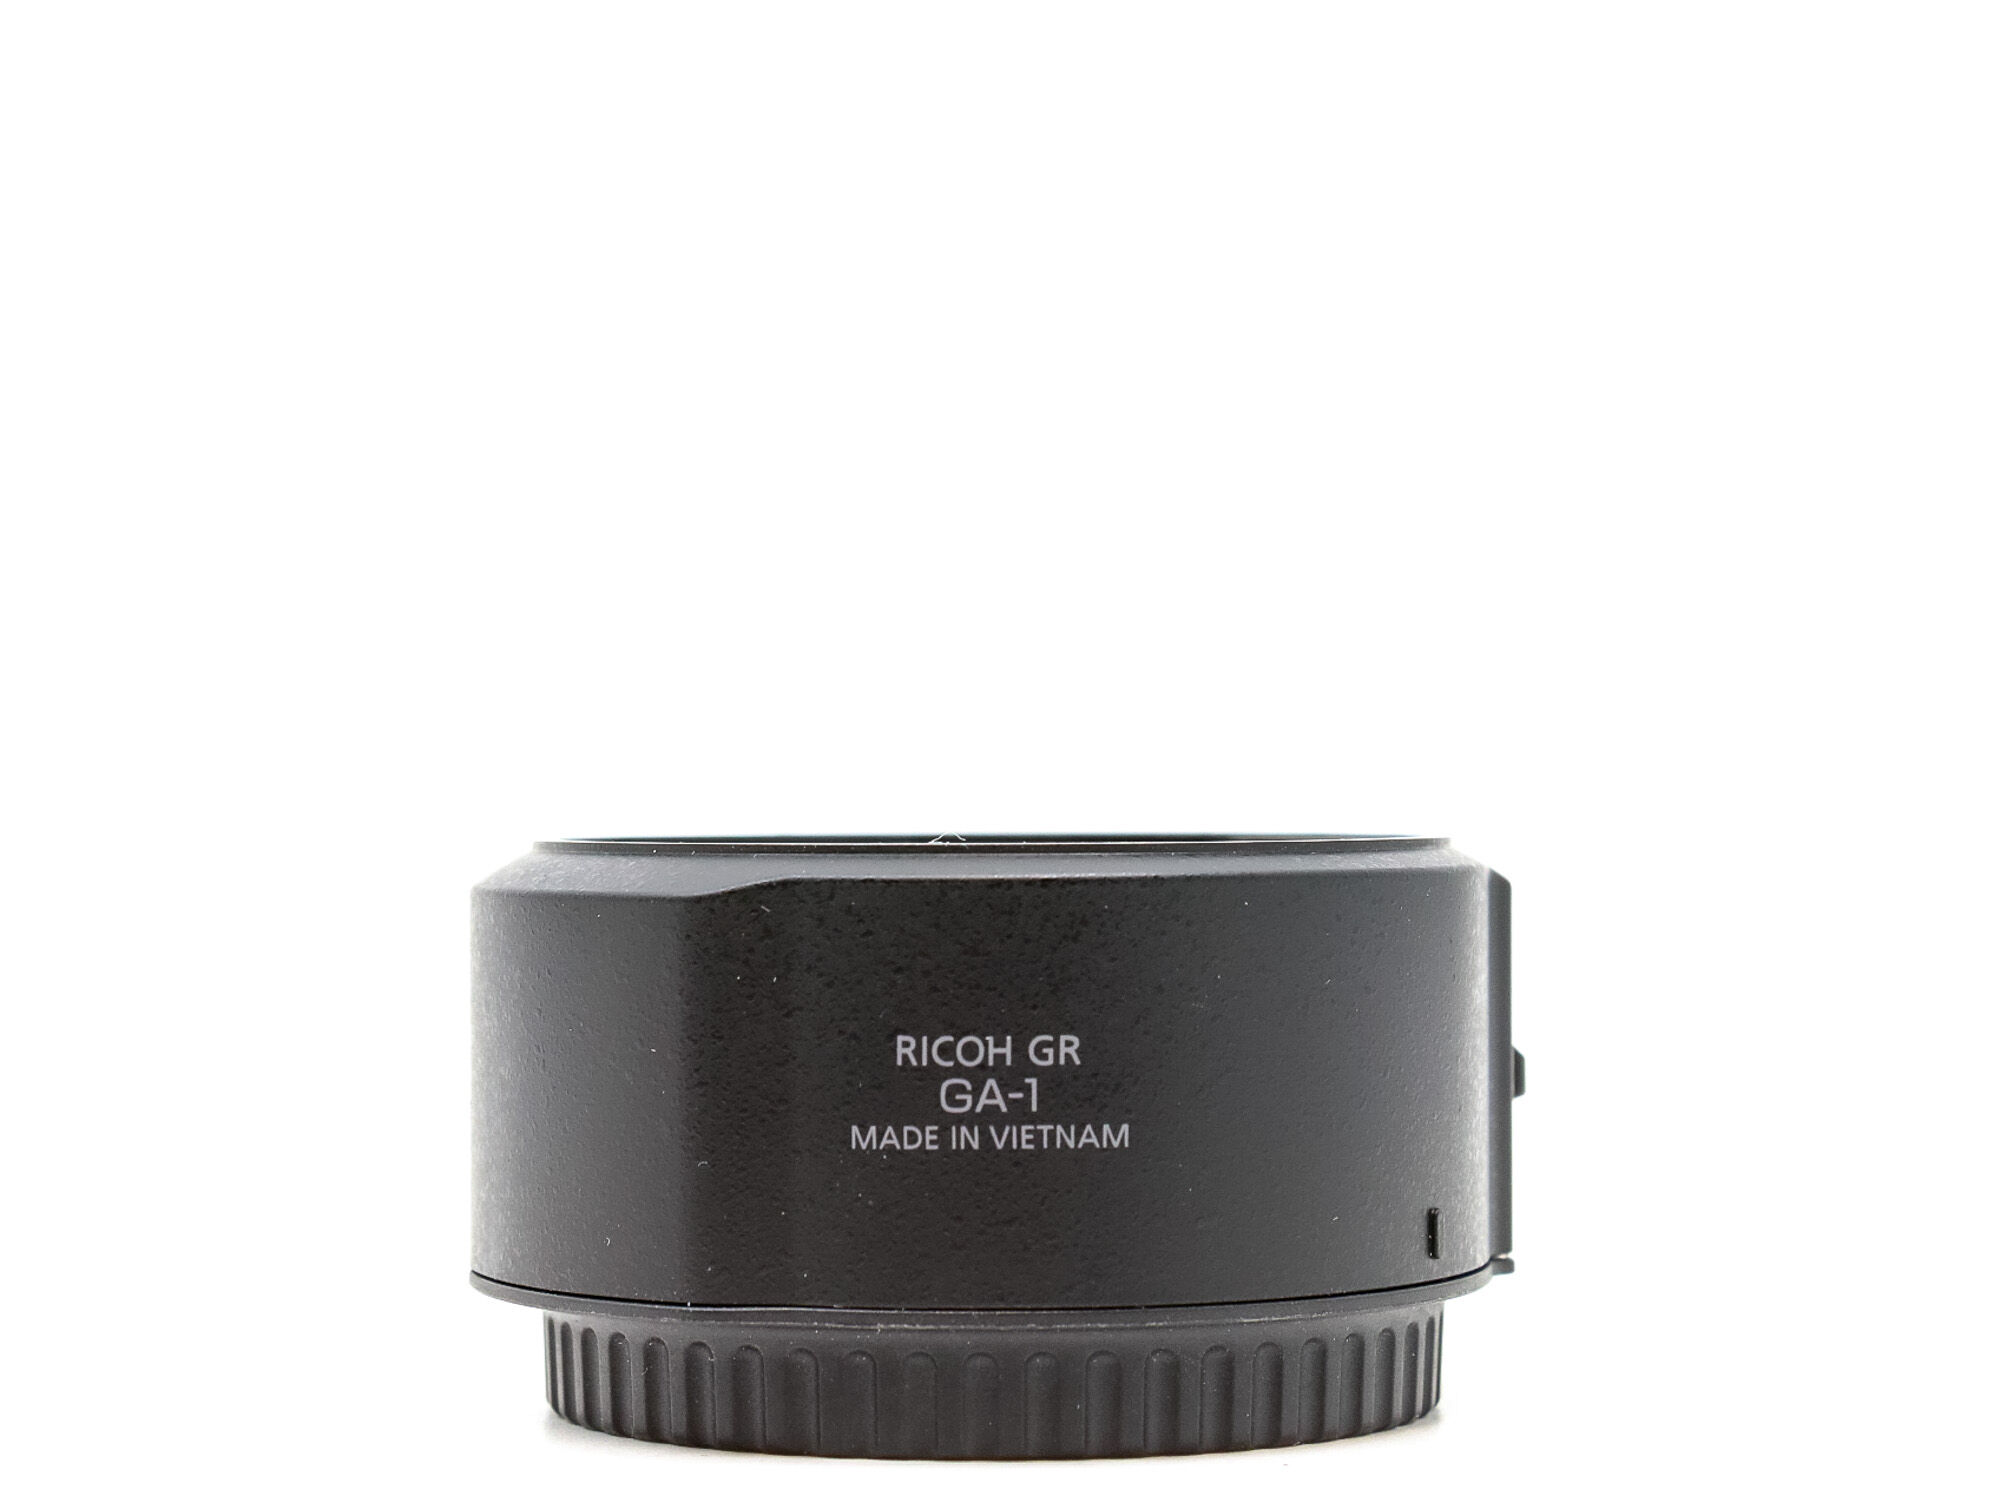 Ricoh GA-1 Lens Adapter (Condition: Like New)